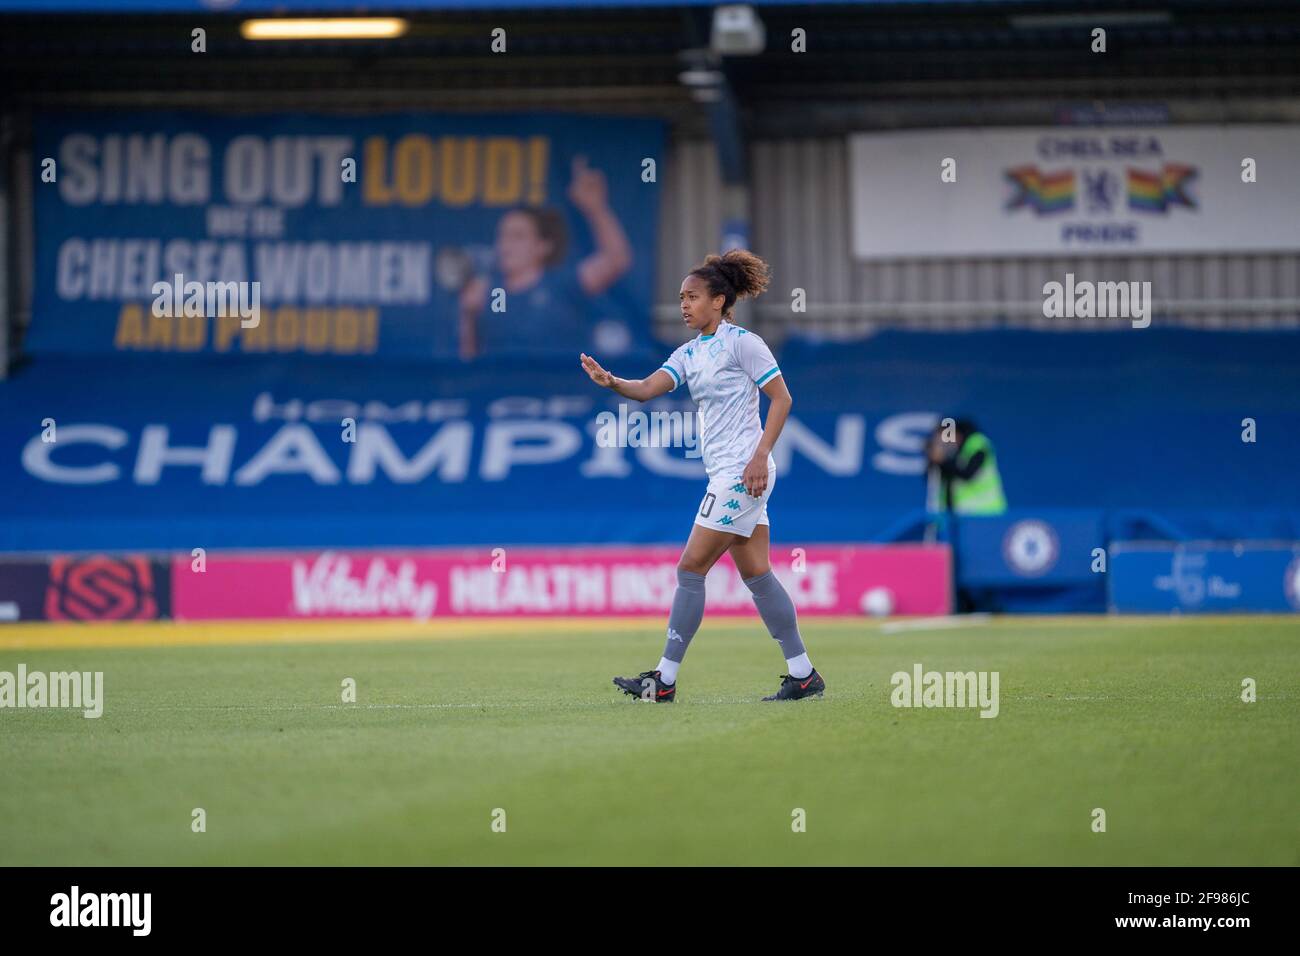 Kingston, UK. 16th Apr, 2021. Atlanta Primus (20 London City Lionesses) during the Vitality Womens FA Cup game between Chelsea and London City Lionesses at Kingsmeadow, in Kingston, England. Credit: SPP Sport Press Photo. /Alamy Live News Stock Photo